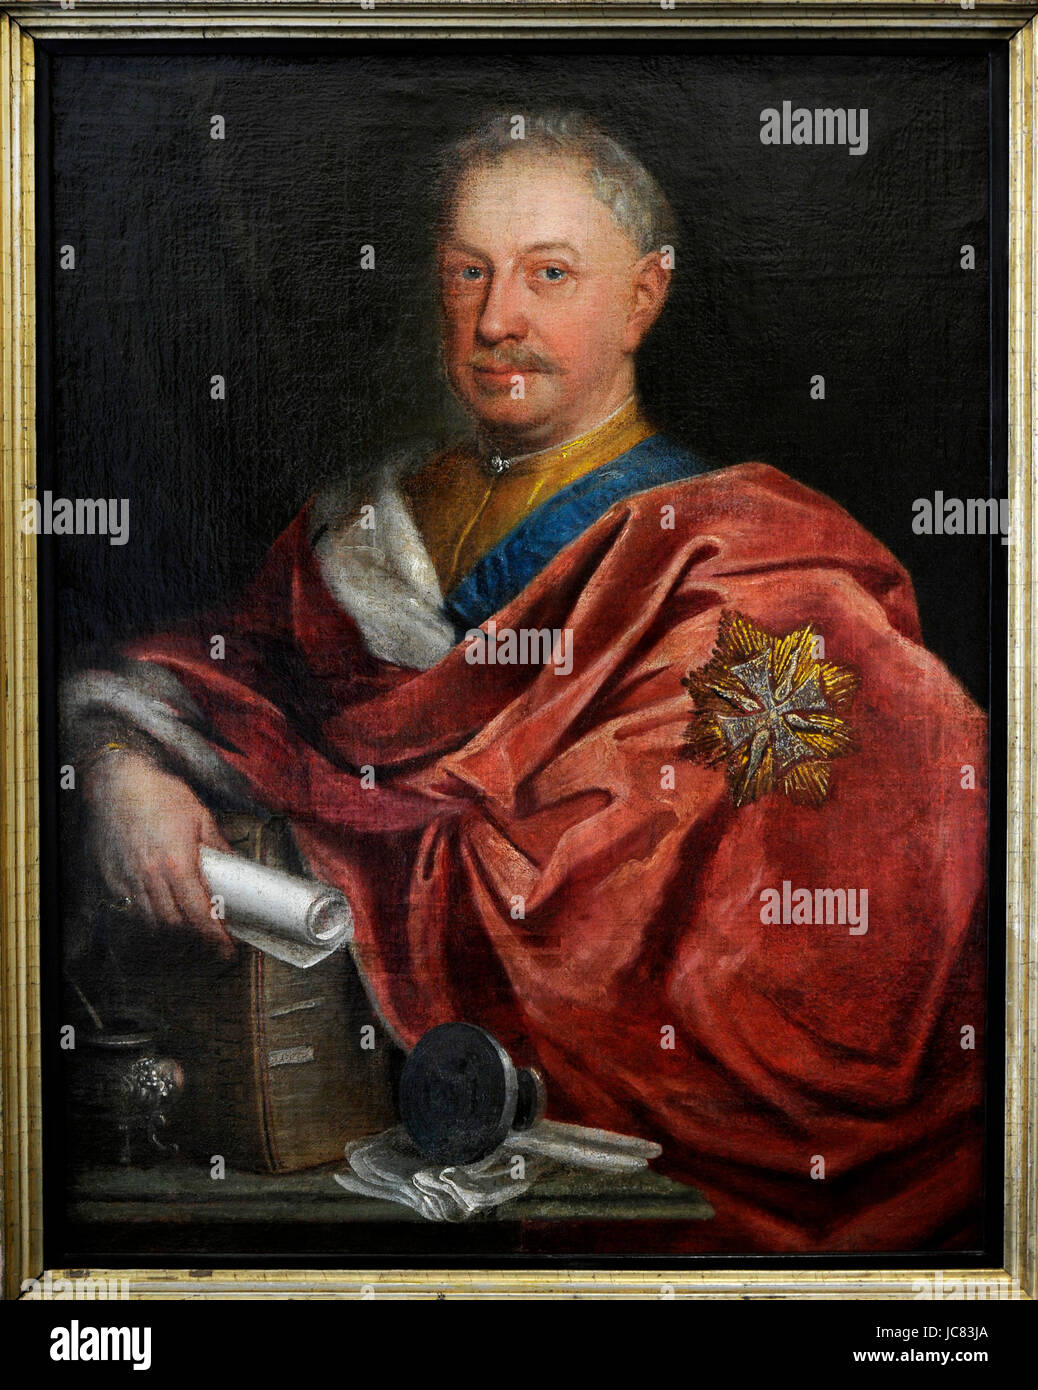 Jan Fryderyk Sapieha (1680-1751). Polish nobleman, Grand Recorder of Lithuania 1706-1716. The Castellan of Trakia and Gran Chancellor of Lithuania. Portrait. By painter Augustyn Mirys (1700-1790). Vilnius Picture Gallery. Lithuania. Stock Photo